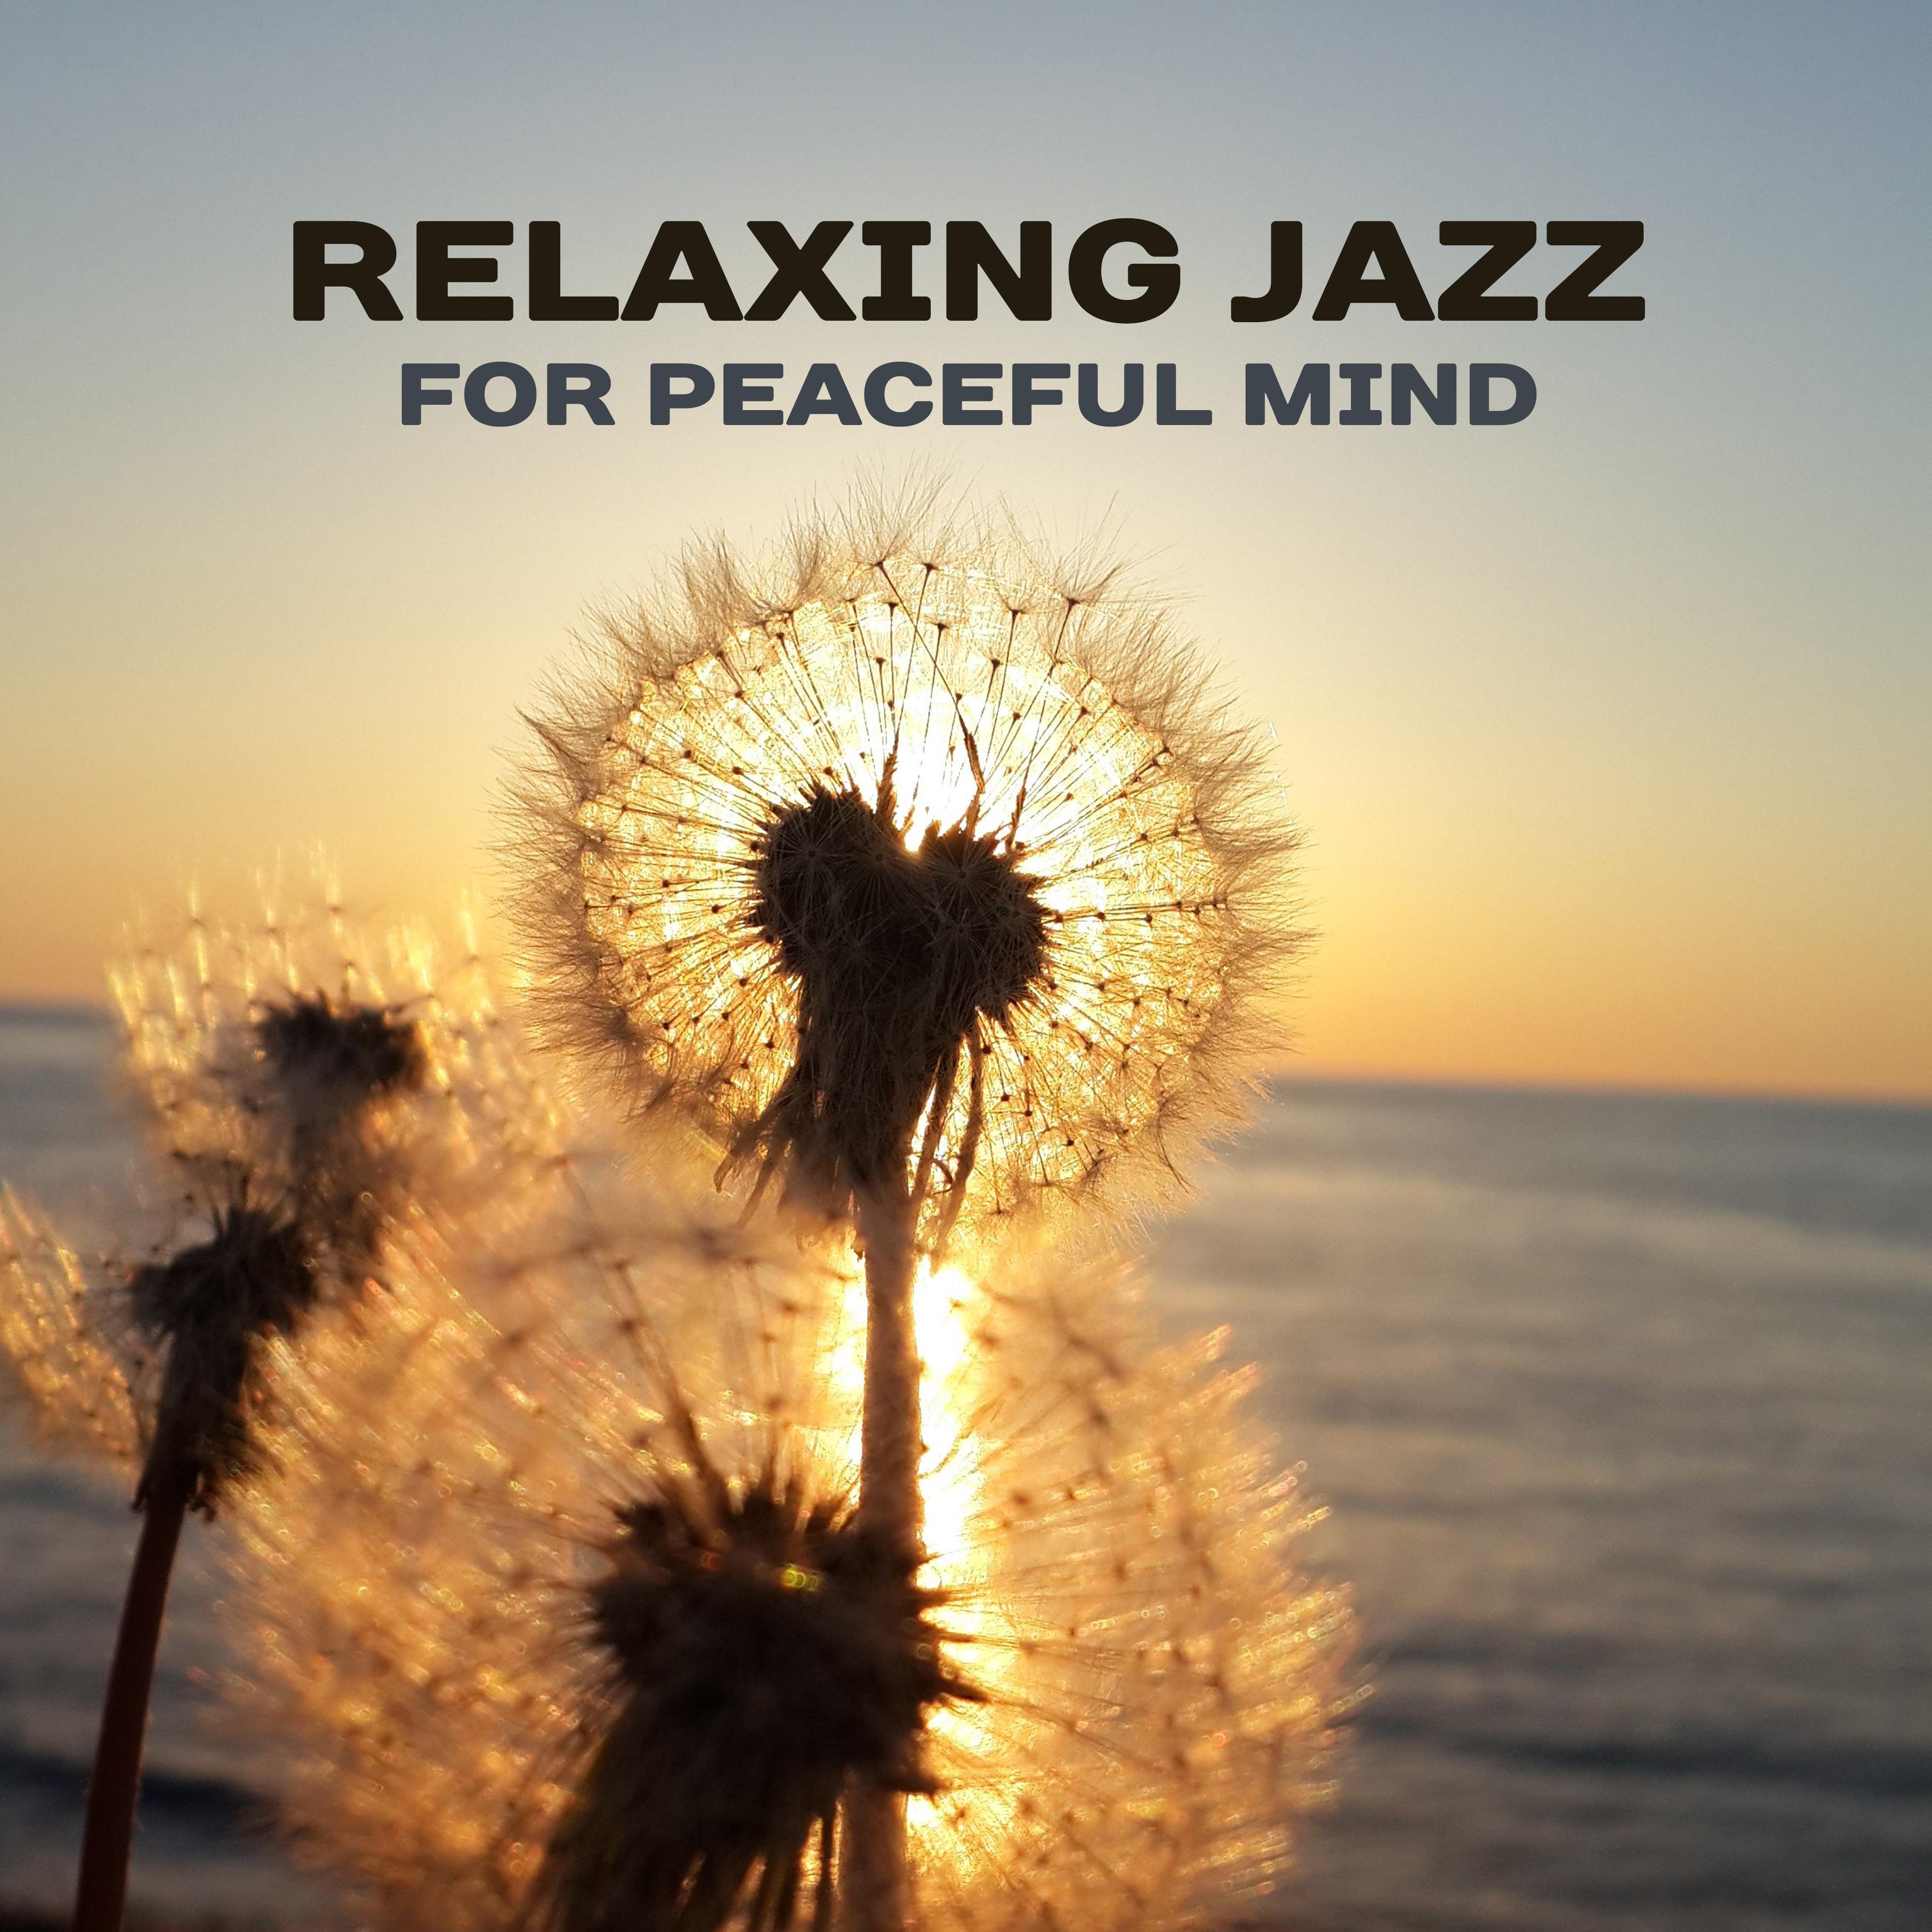 Relaxing Jazz for Peaceful Mind – Best Smooth Jazz to Rest, Soft Music to Calm Down, Chilled Jazz, Gentle Piano, Instrumental Songs, Tranquility